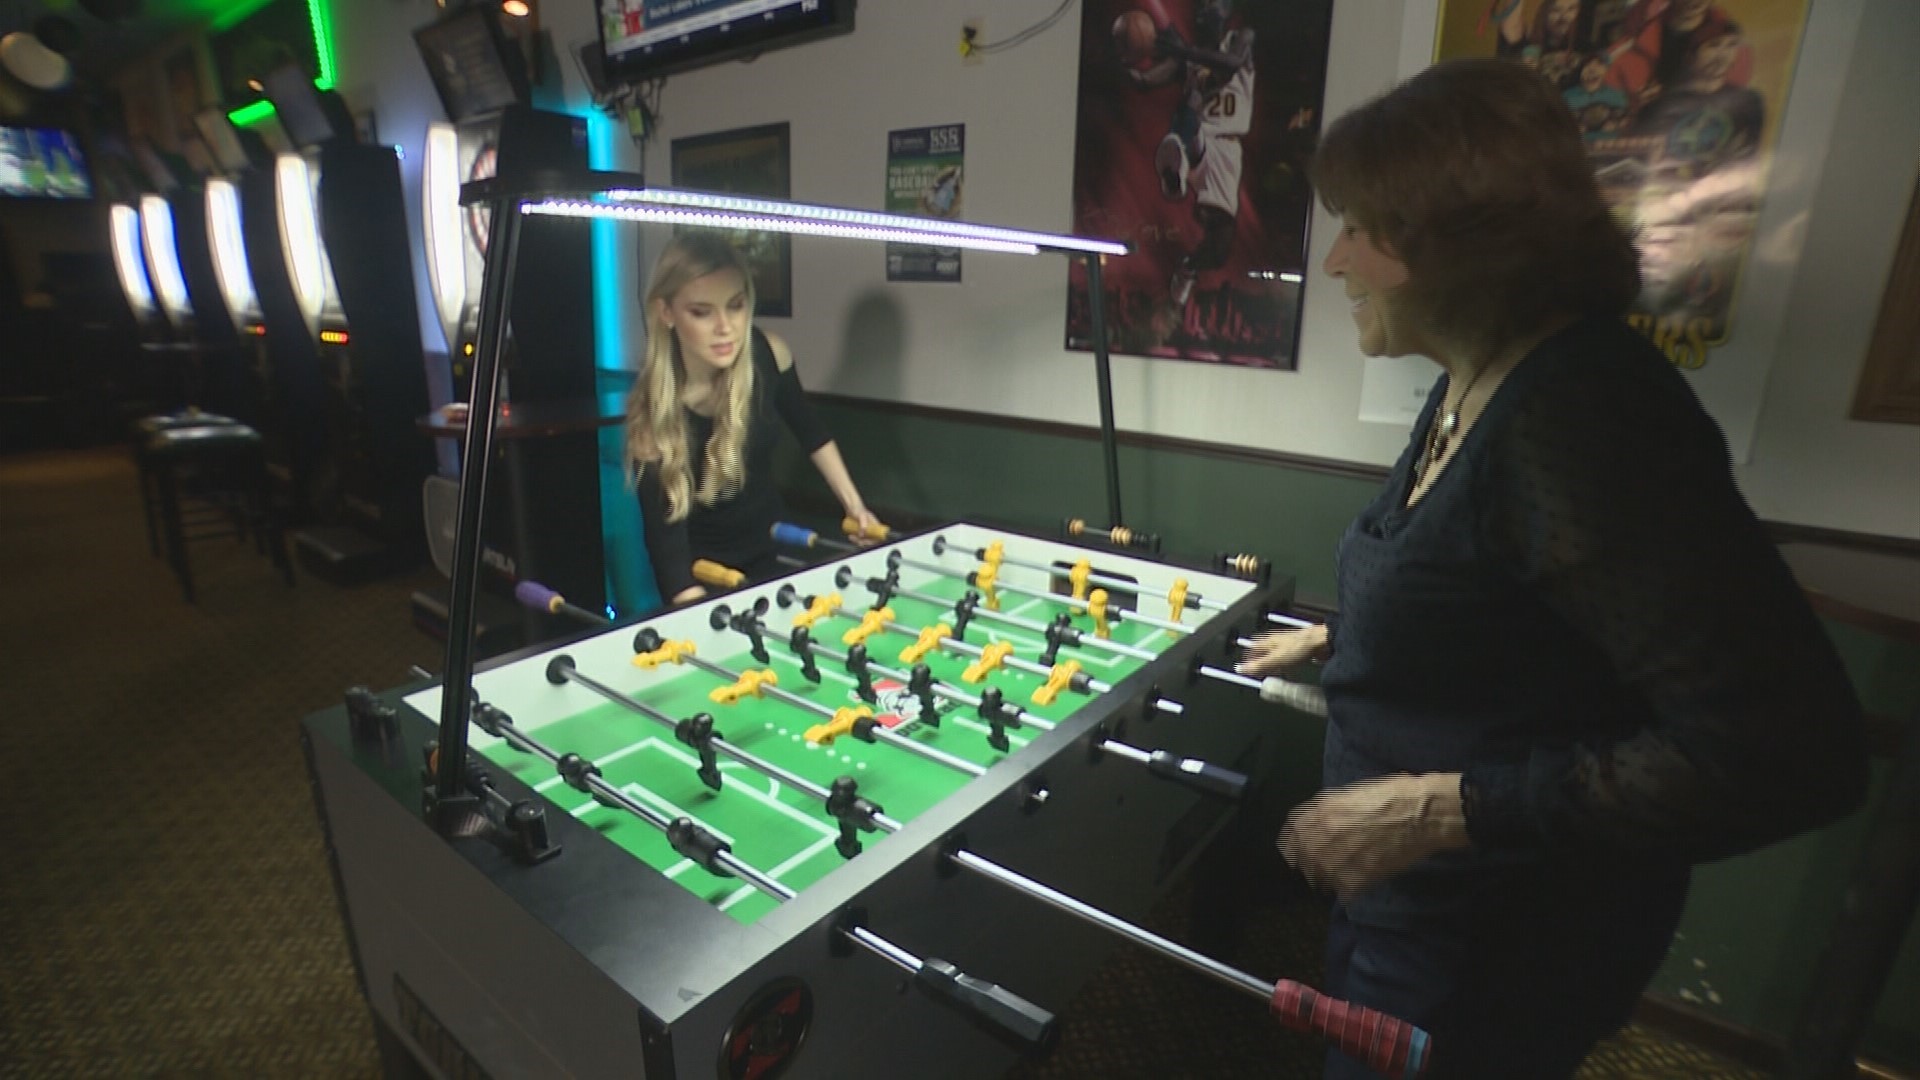 'Foosballers' takes us for a spin around the world of professional foosball